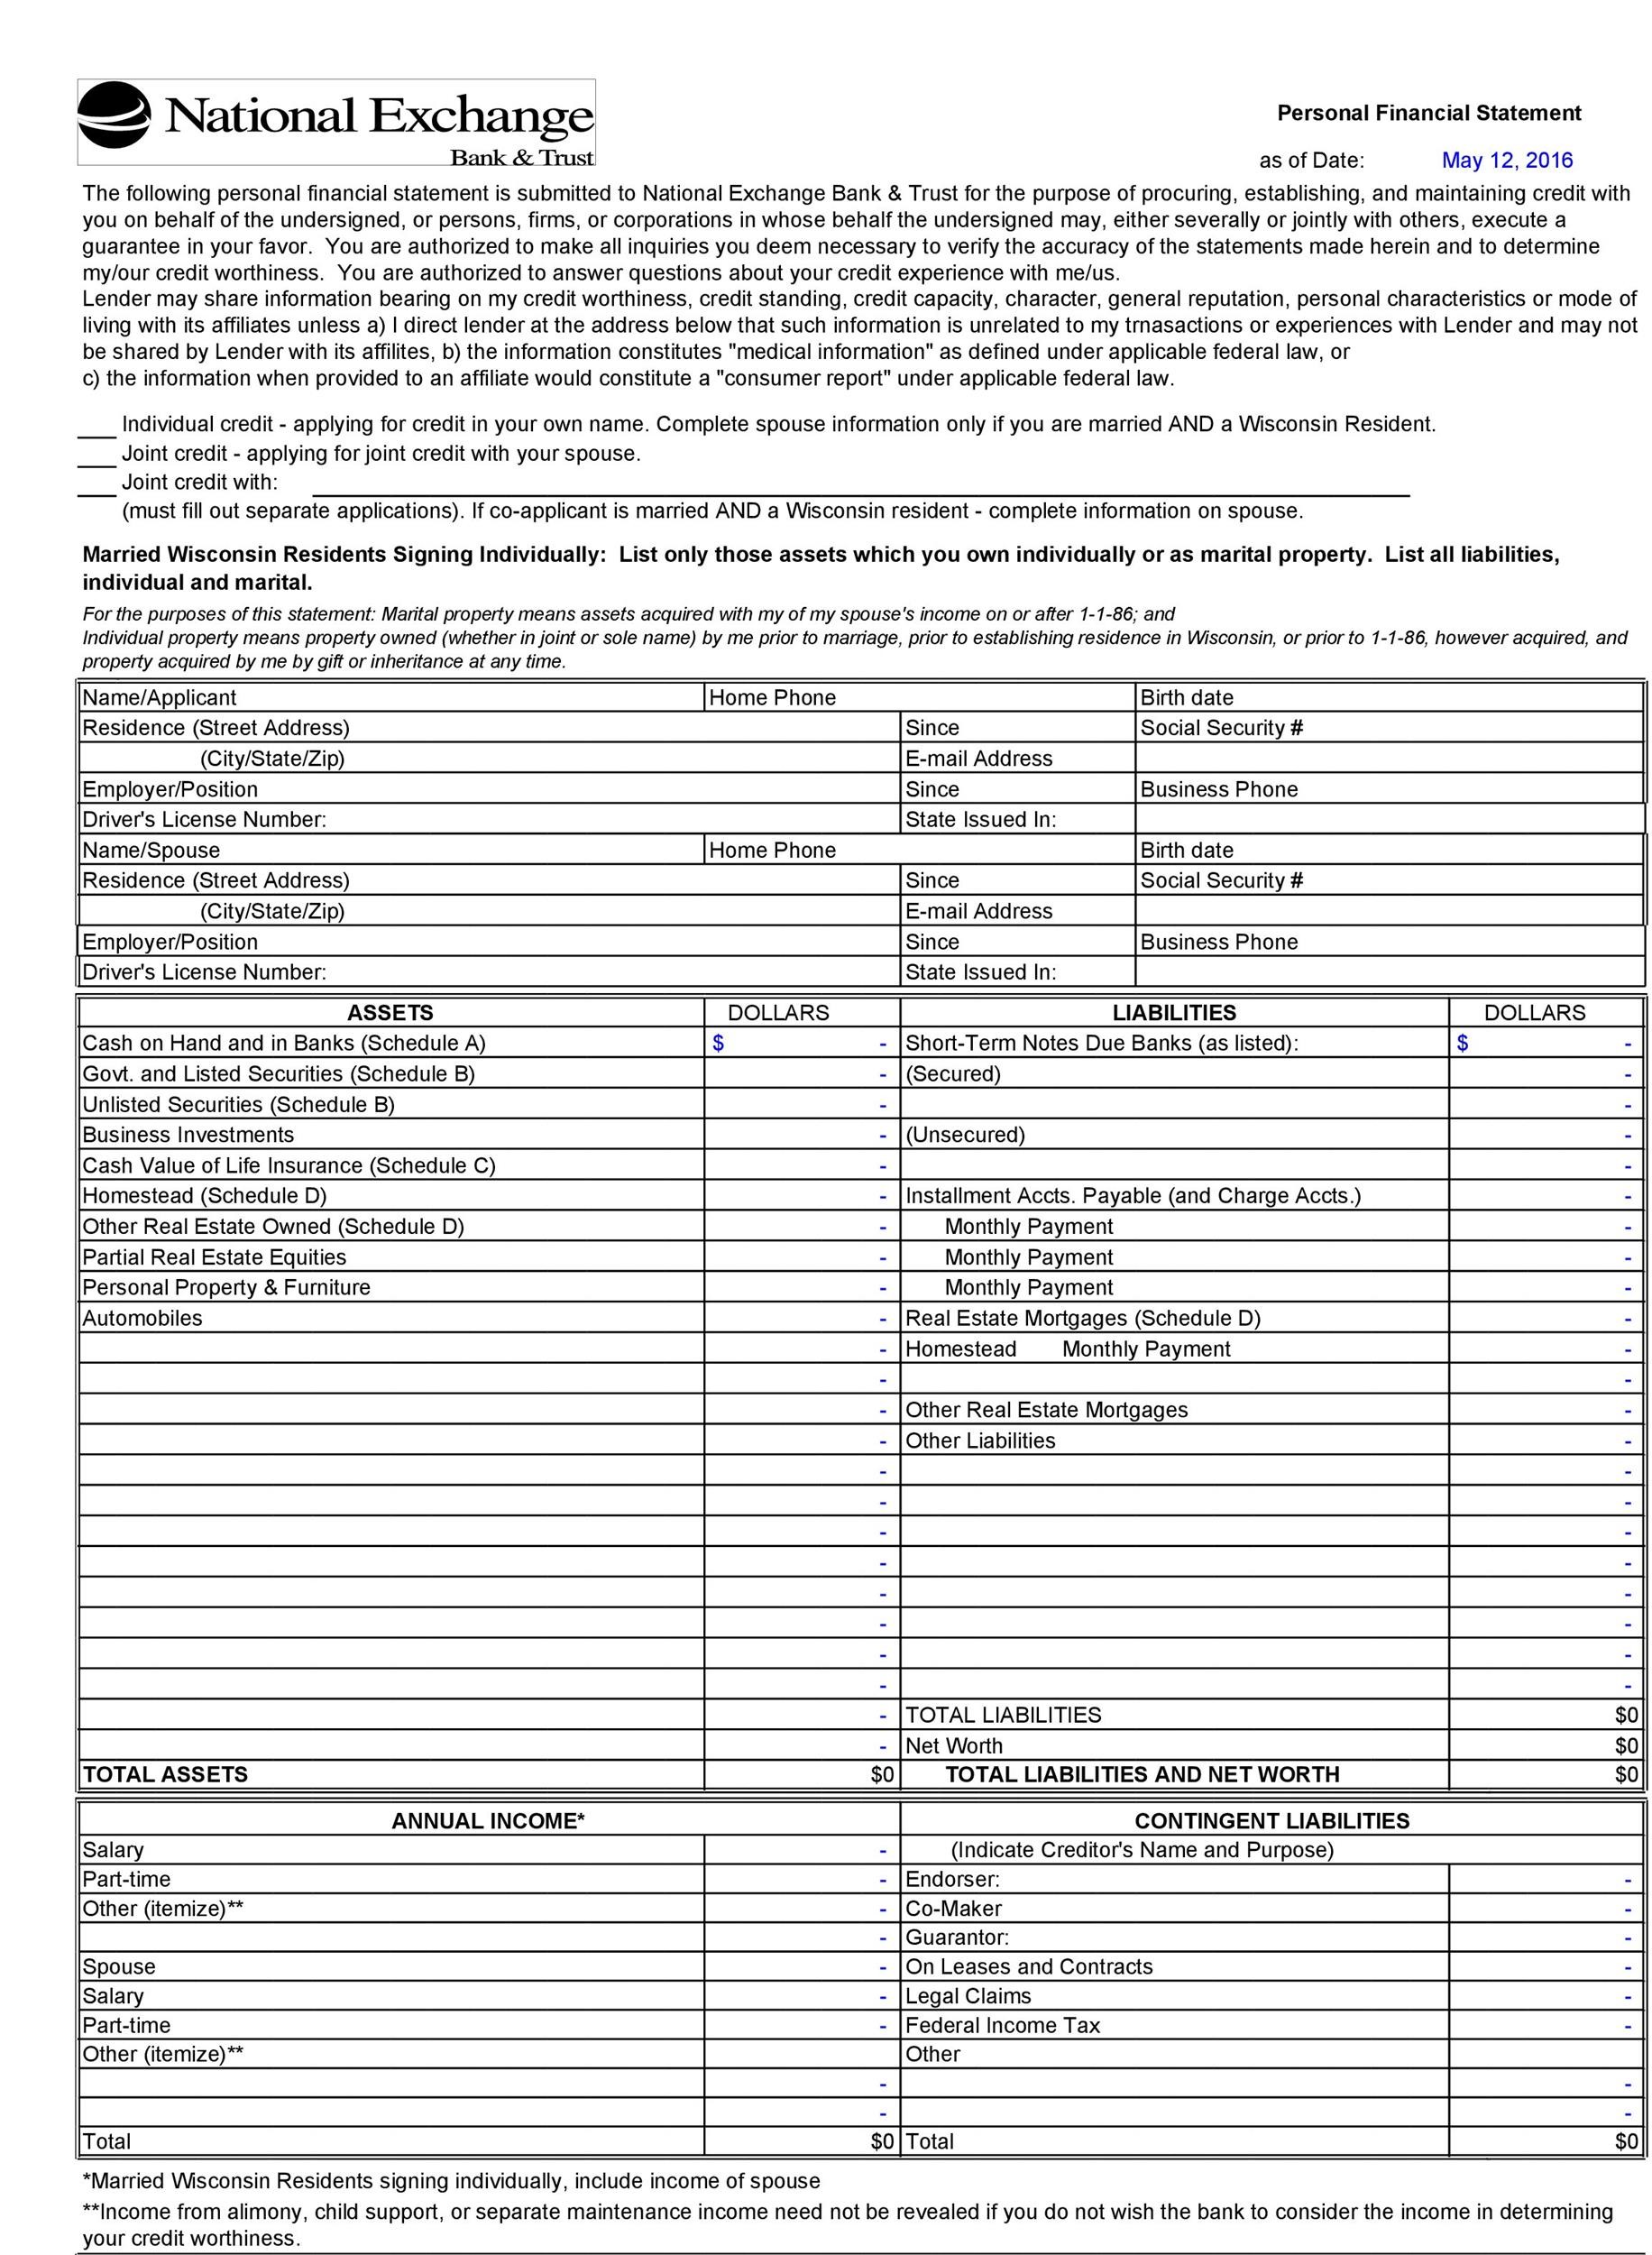 Personal Assets And Liabilities Statement Template from templatelab.com